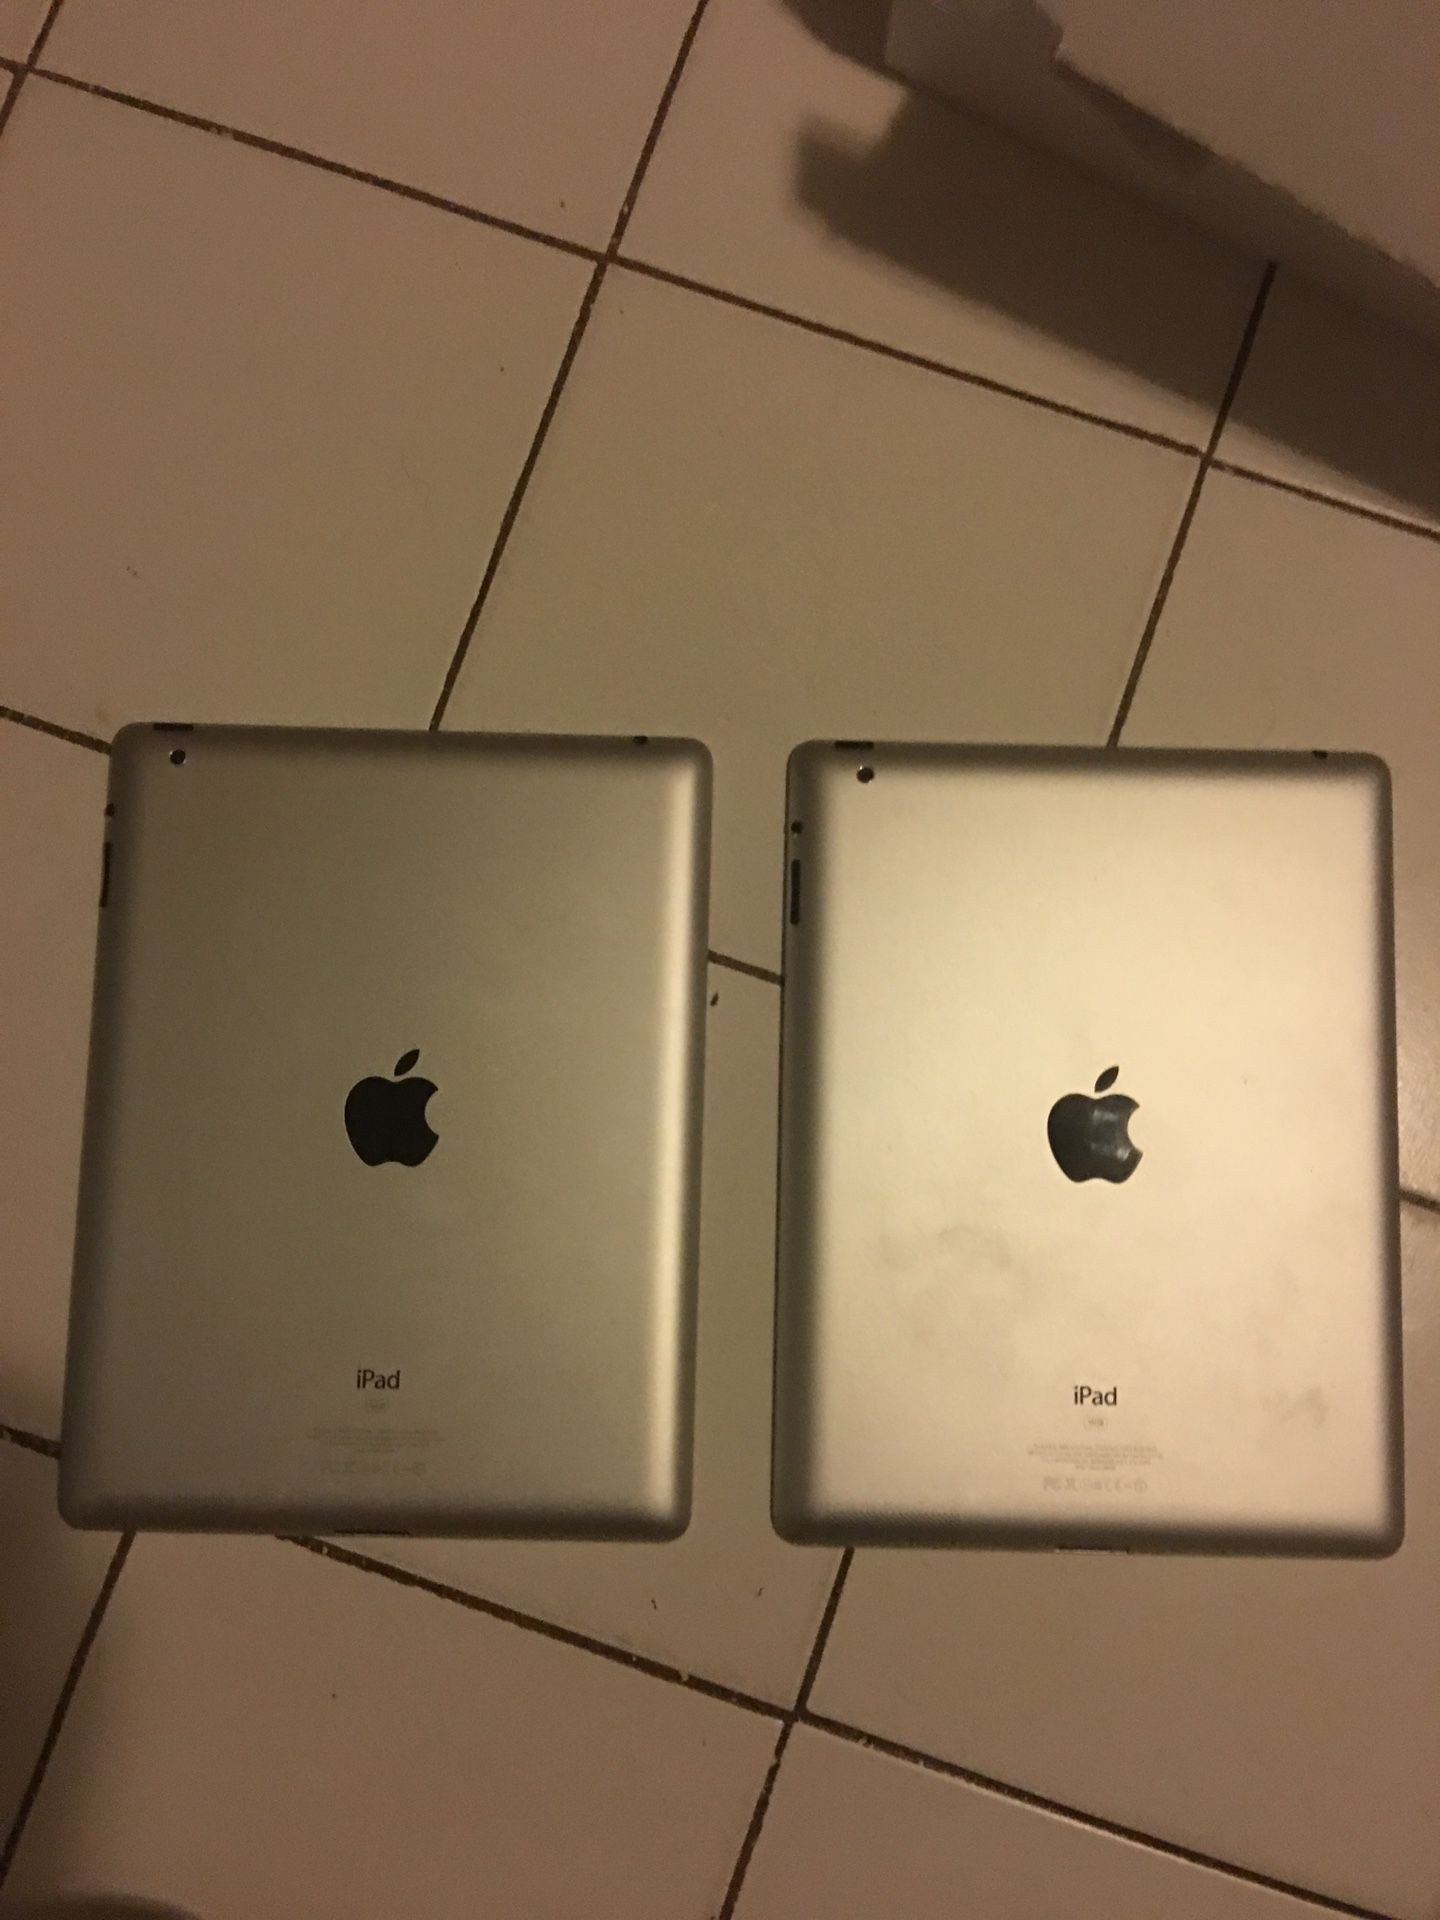 Ipad 2/ 16GB 9.7” all works perfect $69 Each/Firm price